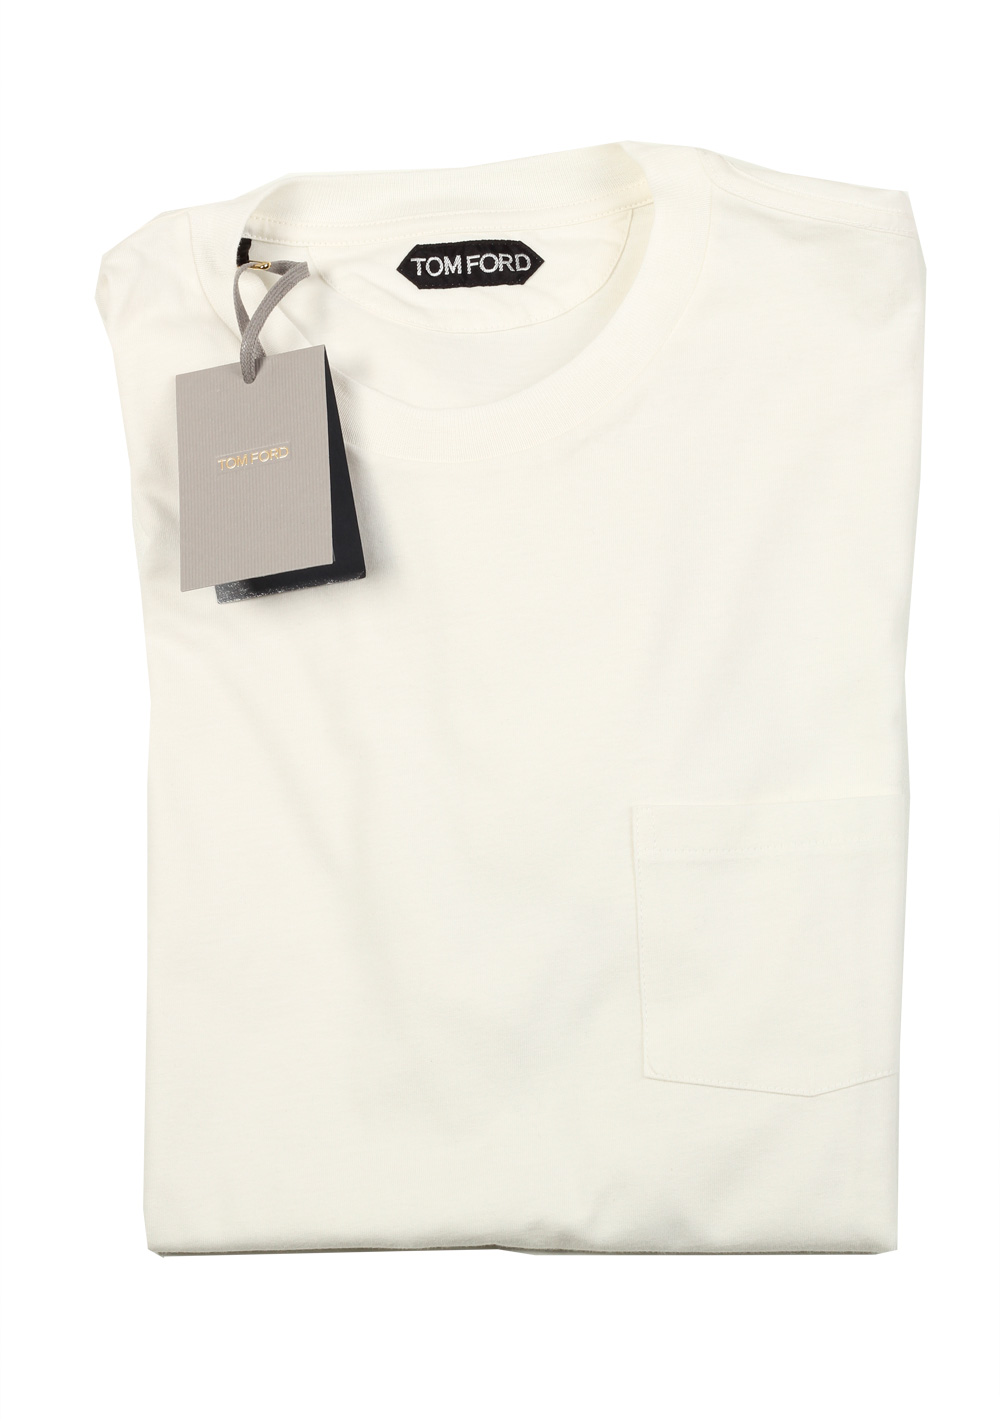 TOM FORD Crew Neck Off White Tee Shirt Size 52 / 42R U.S. | Costume Limité